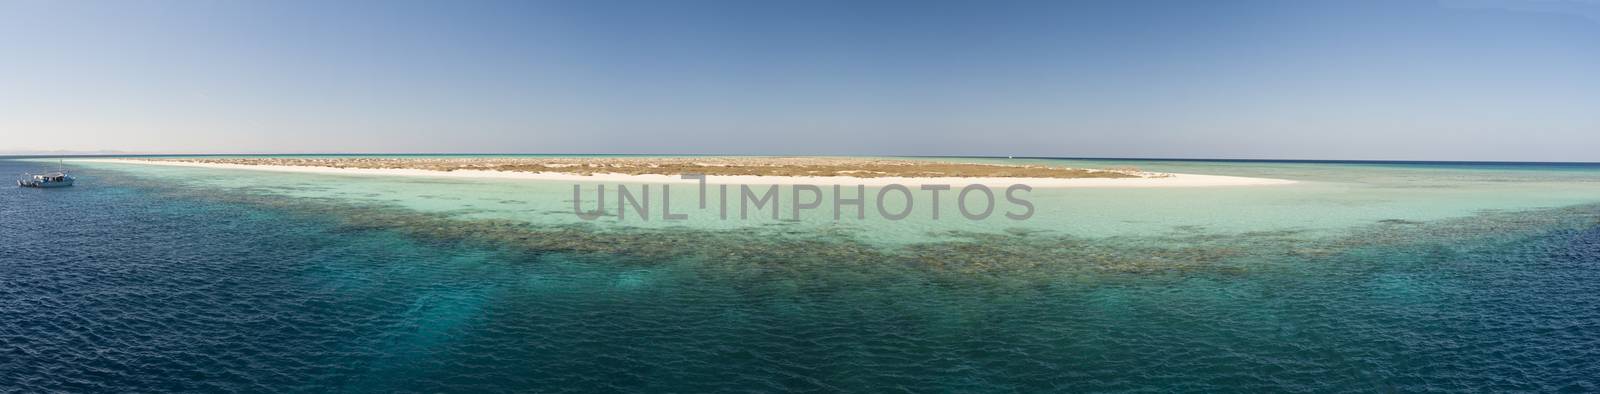 Wide panoramic image of view over a remote tropical desert island